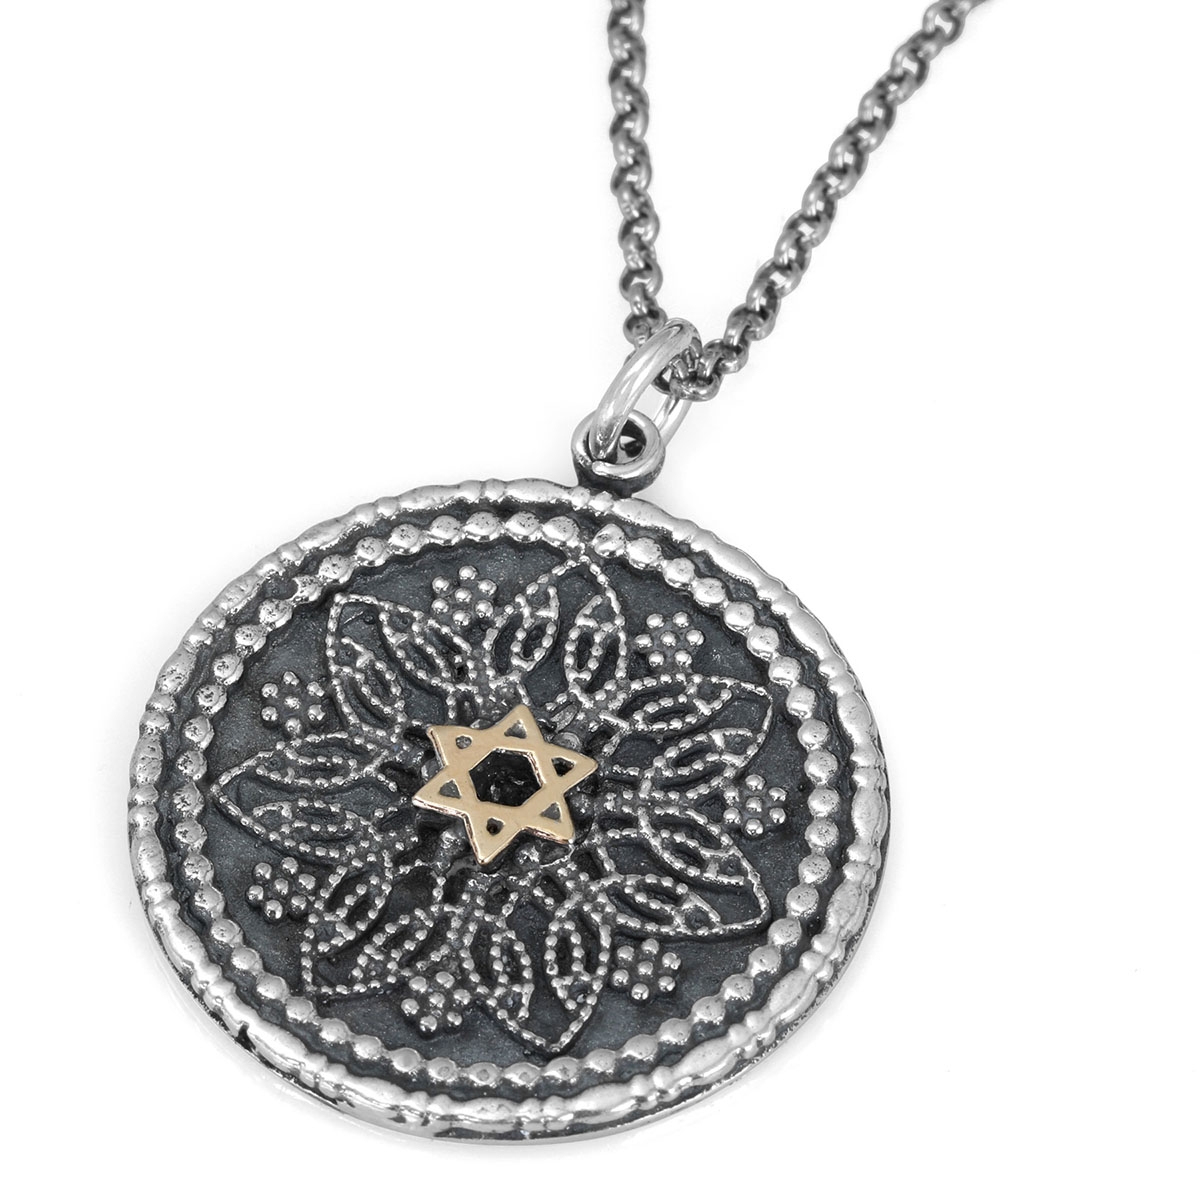 925 Sterling Silver Men's Necklace With Star of David and Floral Design - 1